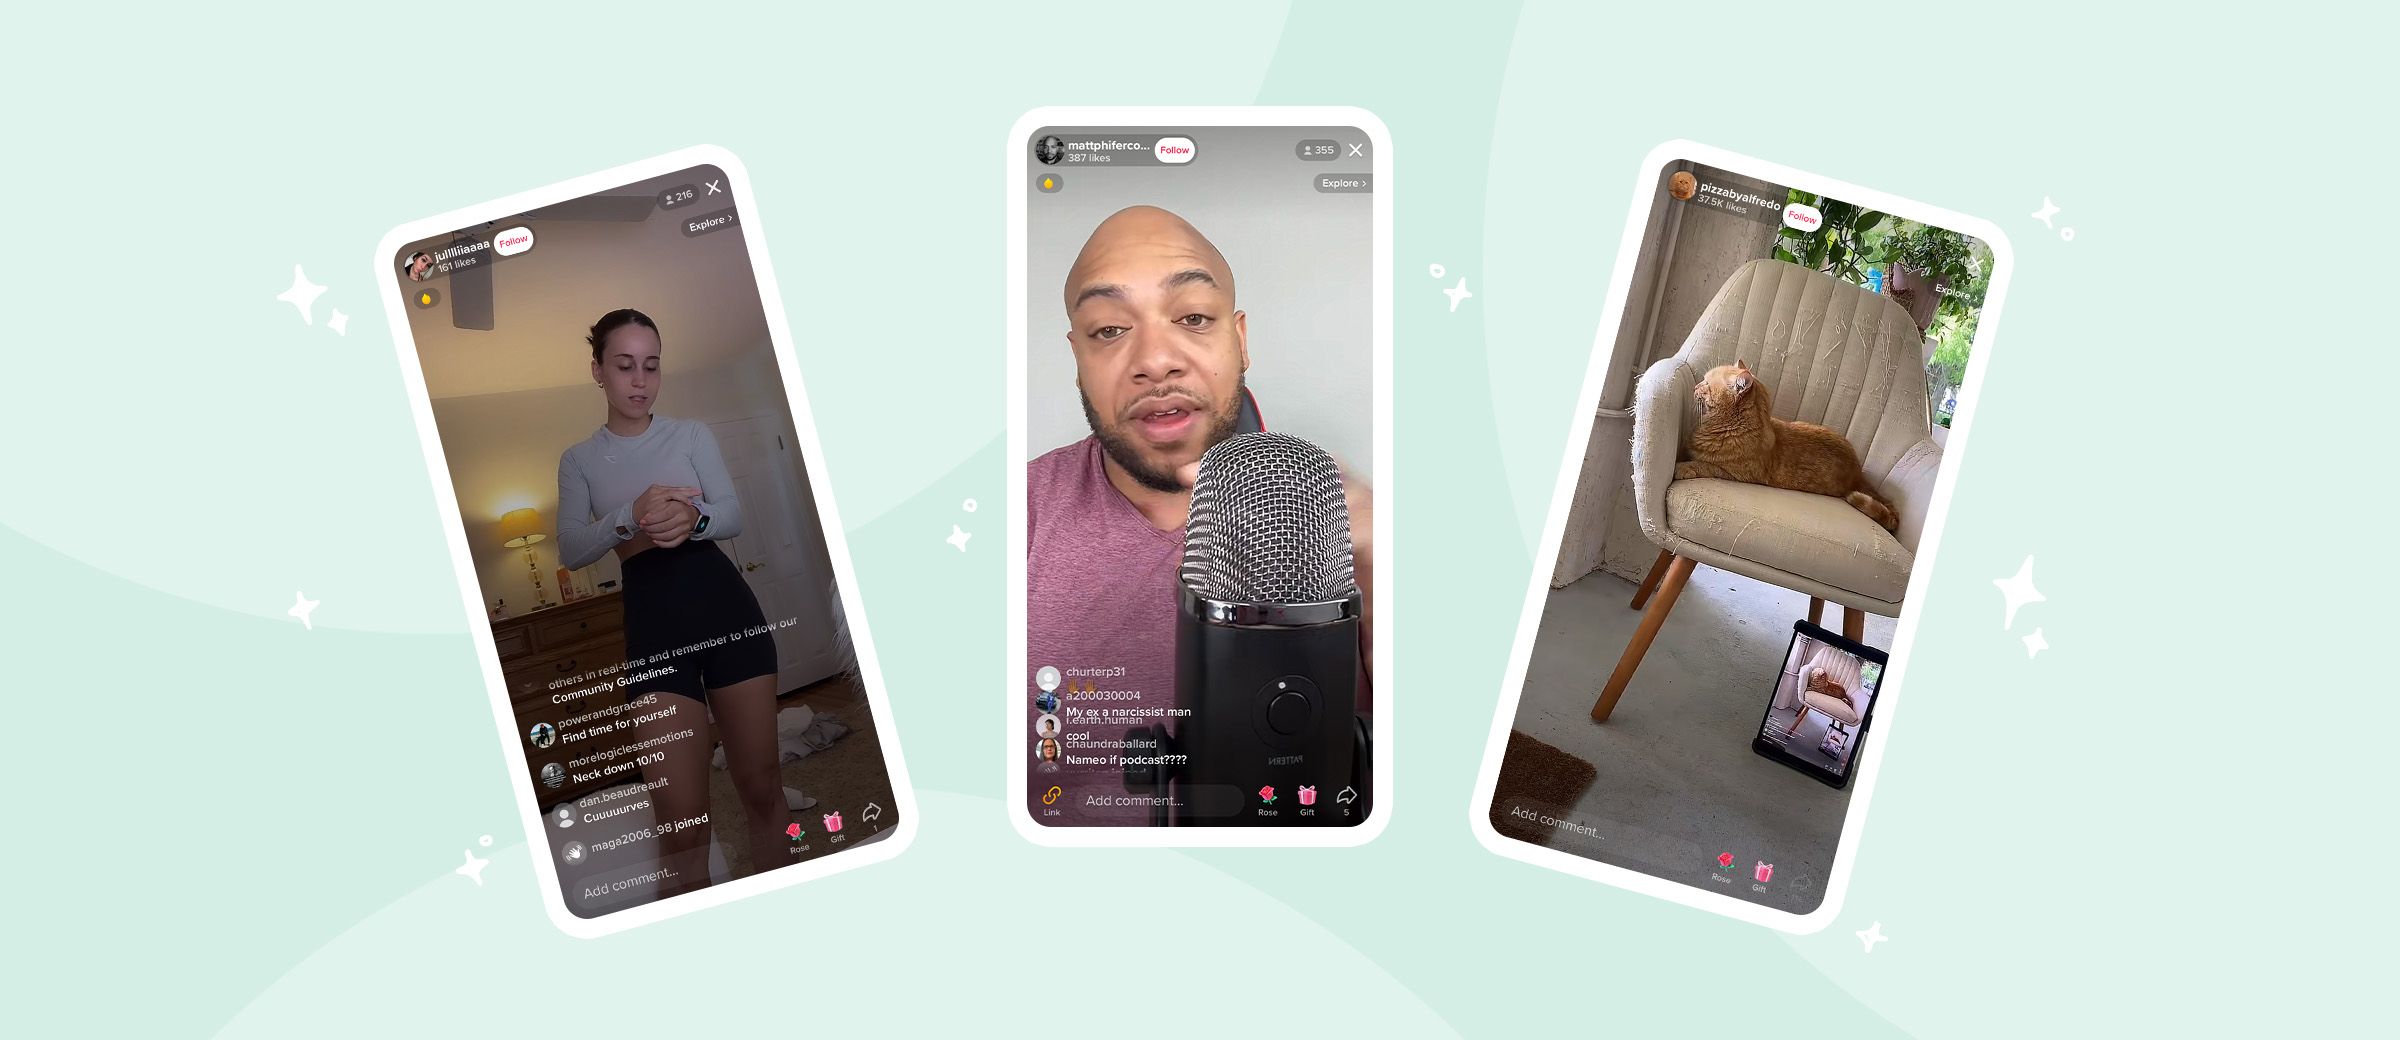 TikTok Live: Best Practices for Marketers and SMBs, by gabriella-layne-avery